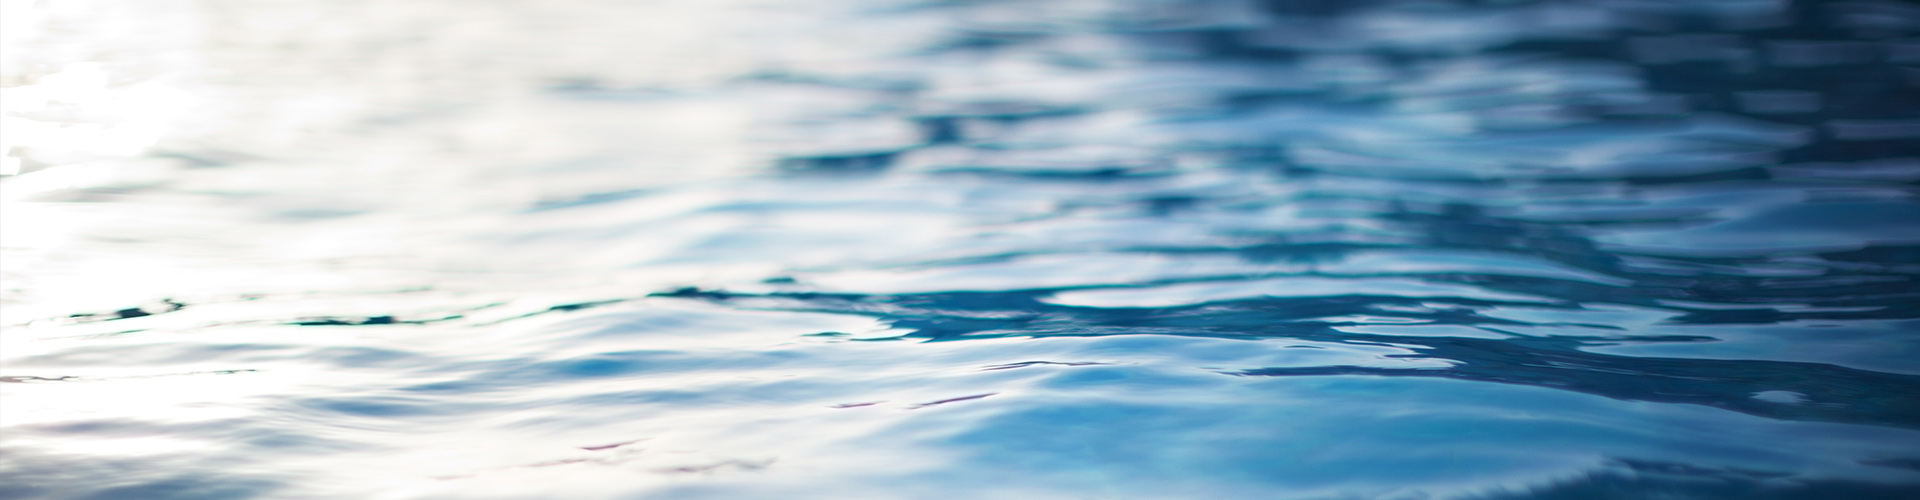 water - Insights - banner - 1900 x 500